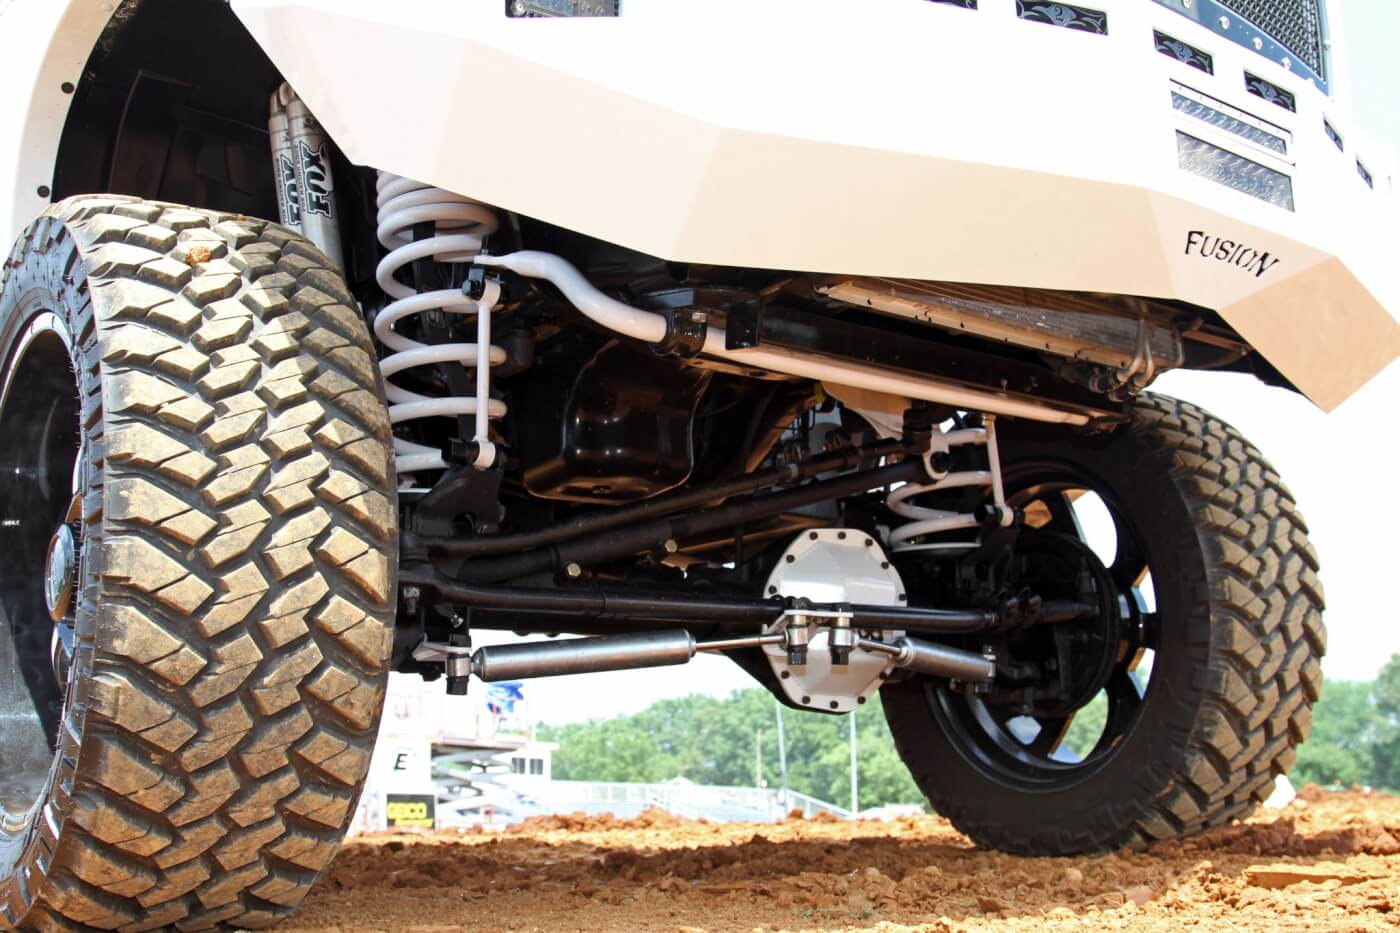 The front suspension features painted BDS Suspension components and Fox Racing Shox.